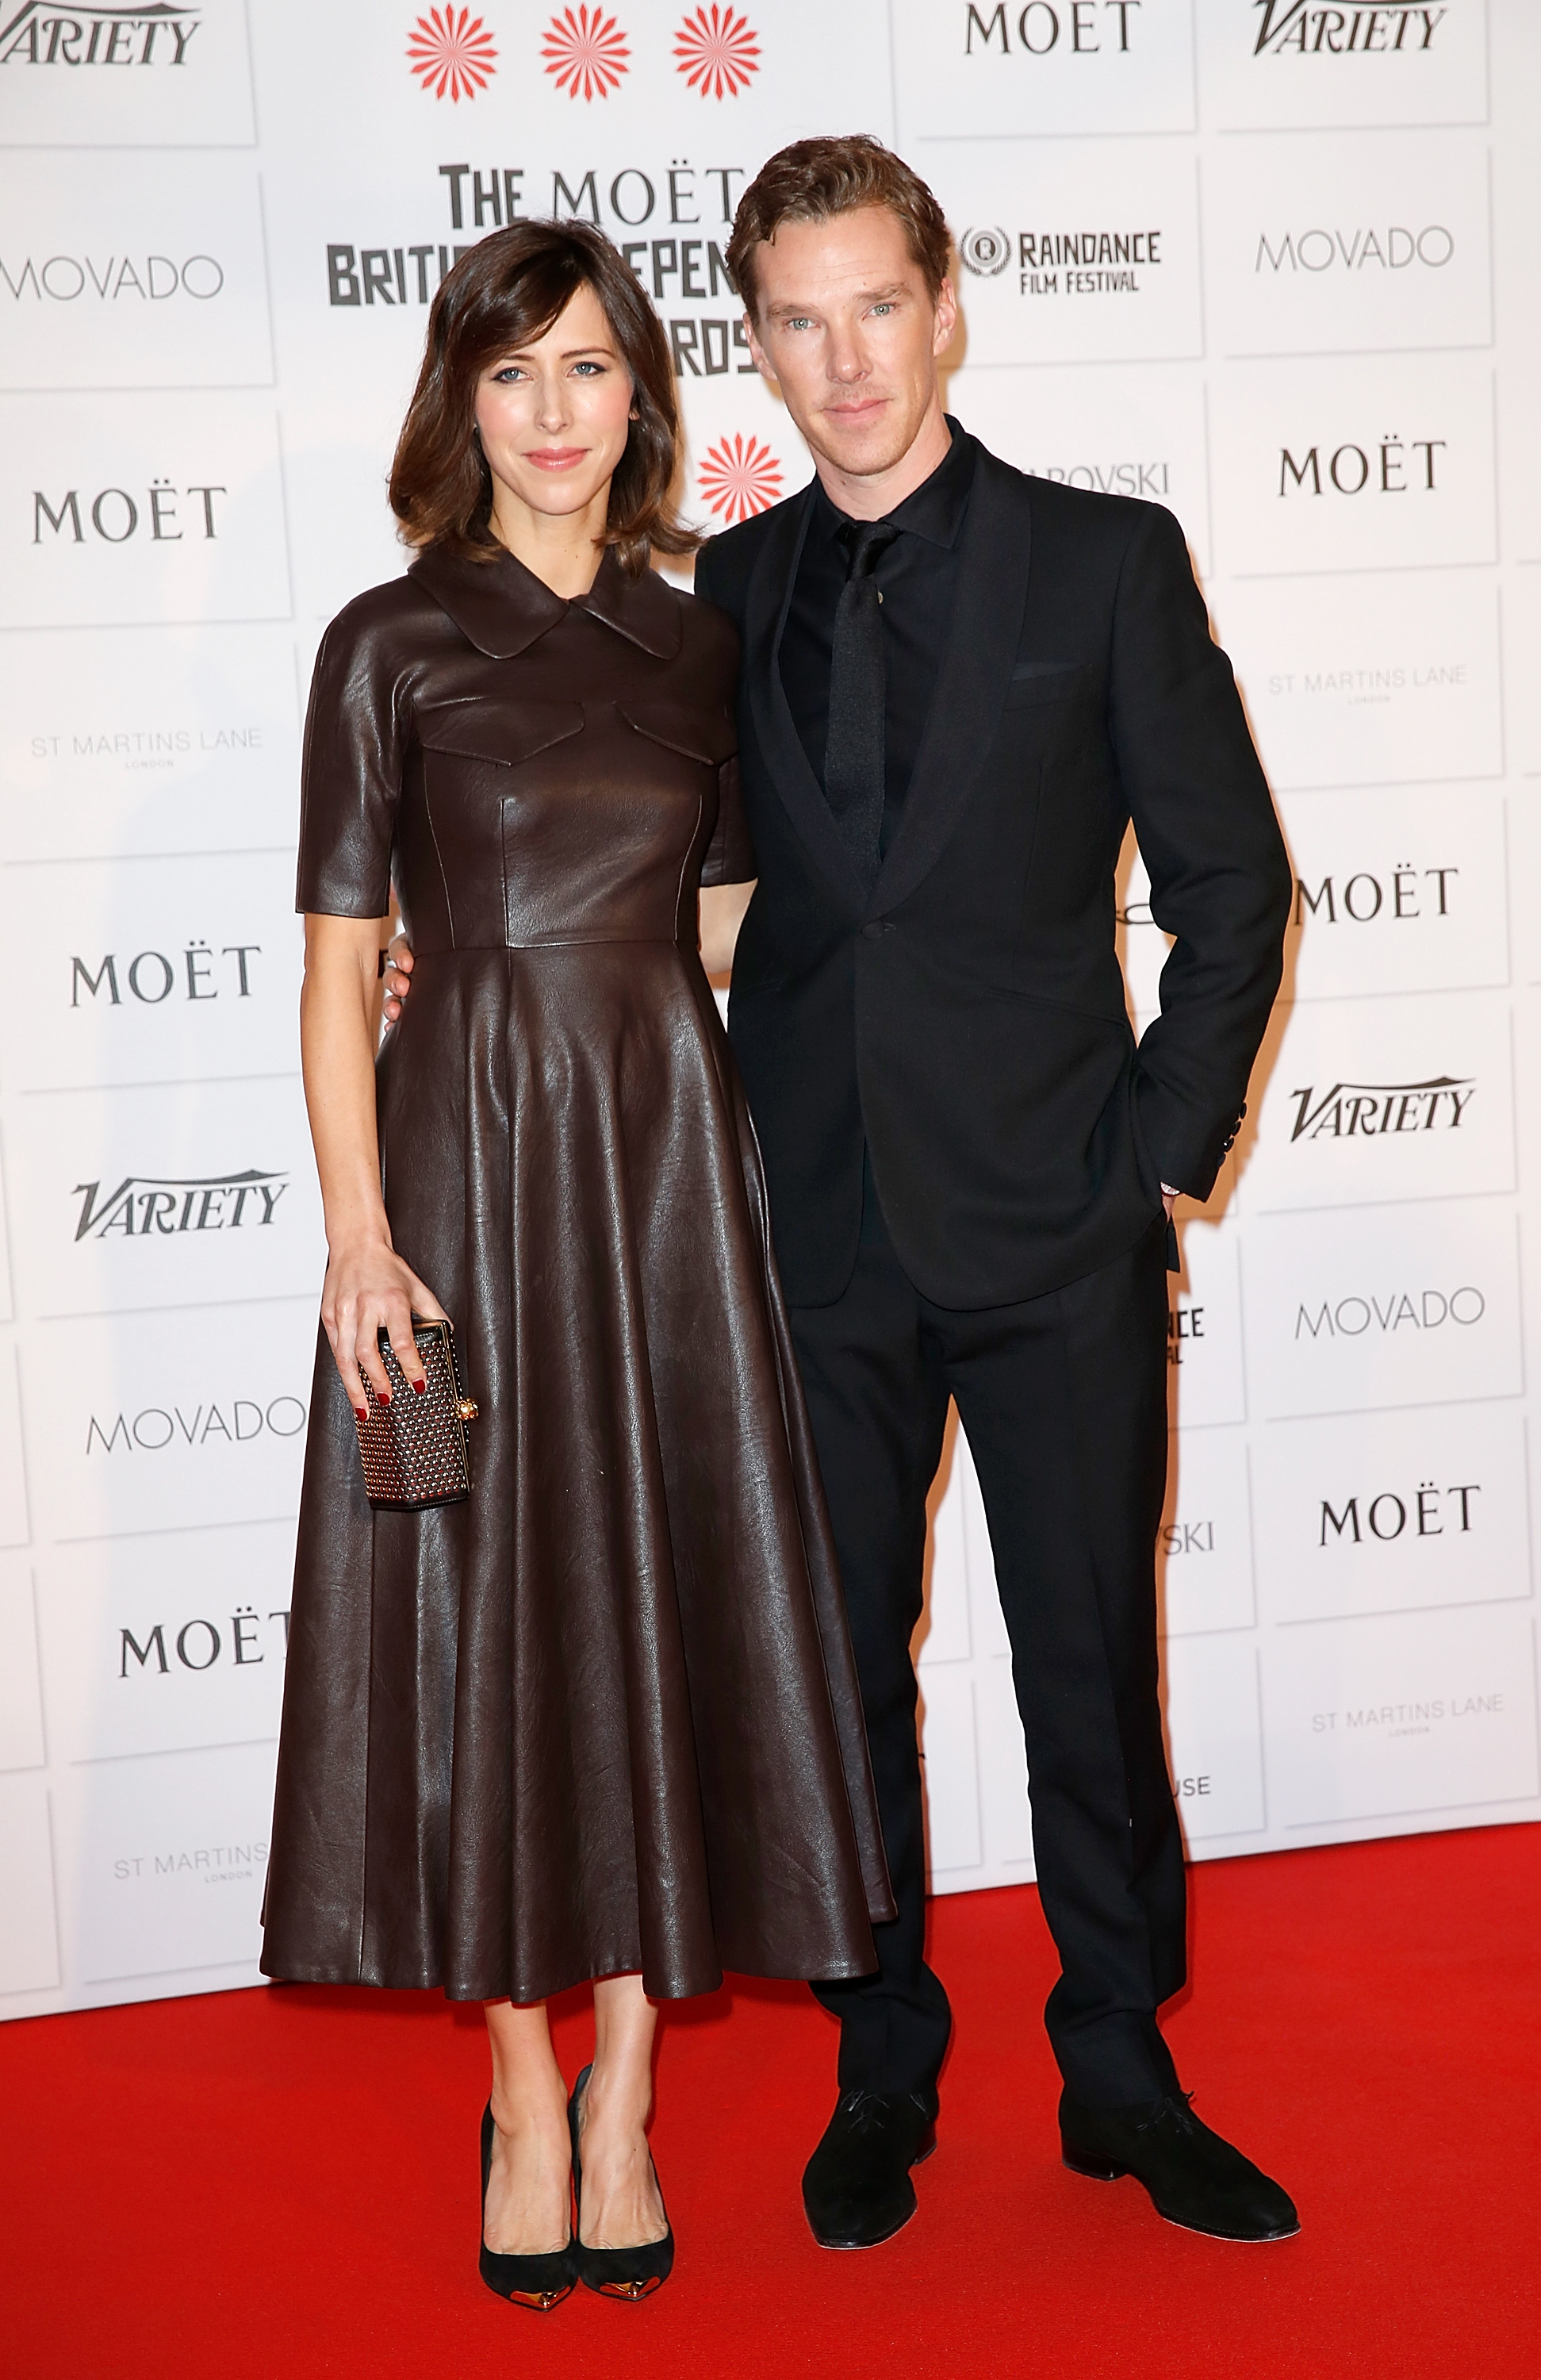 Photo by Tristan Fewings/Getty Images for The Moet British Independent Film Awards